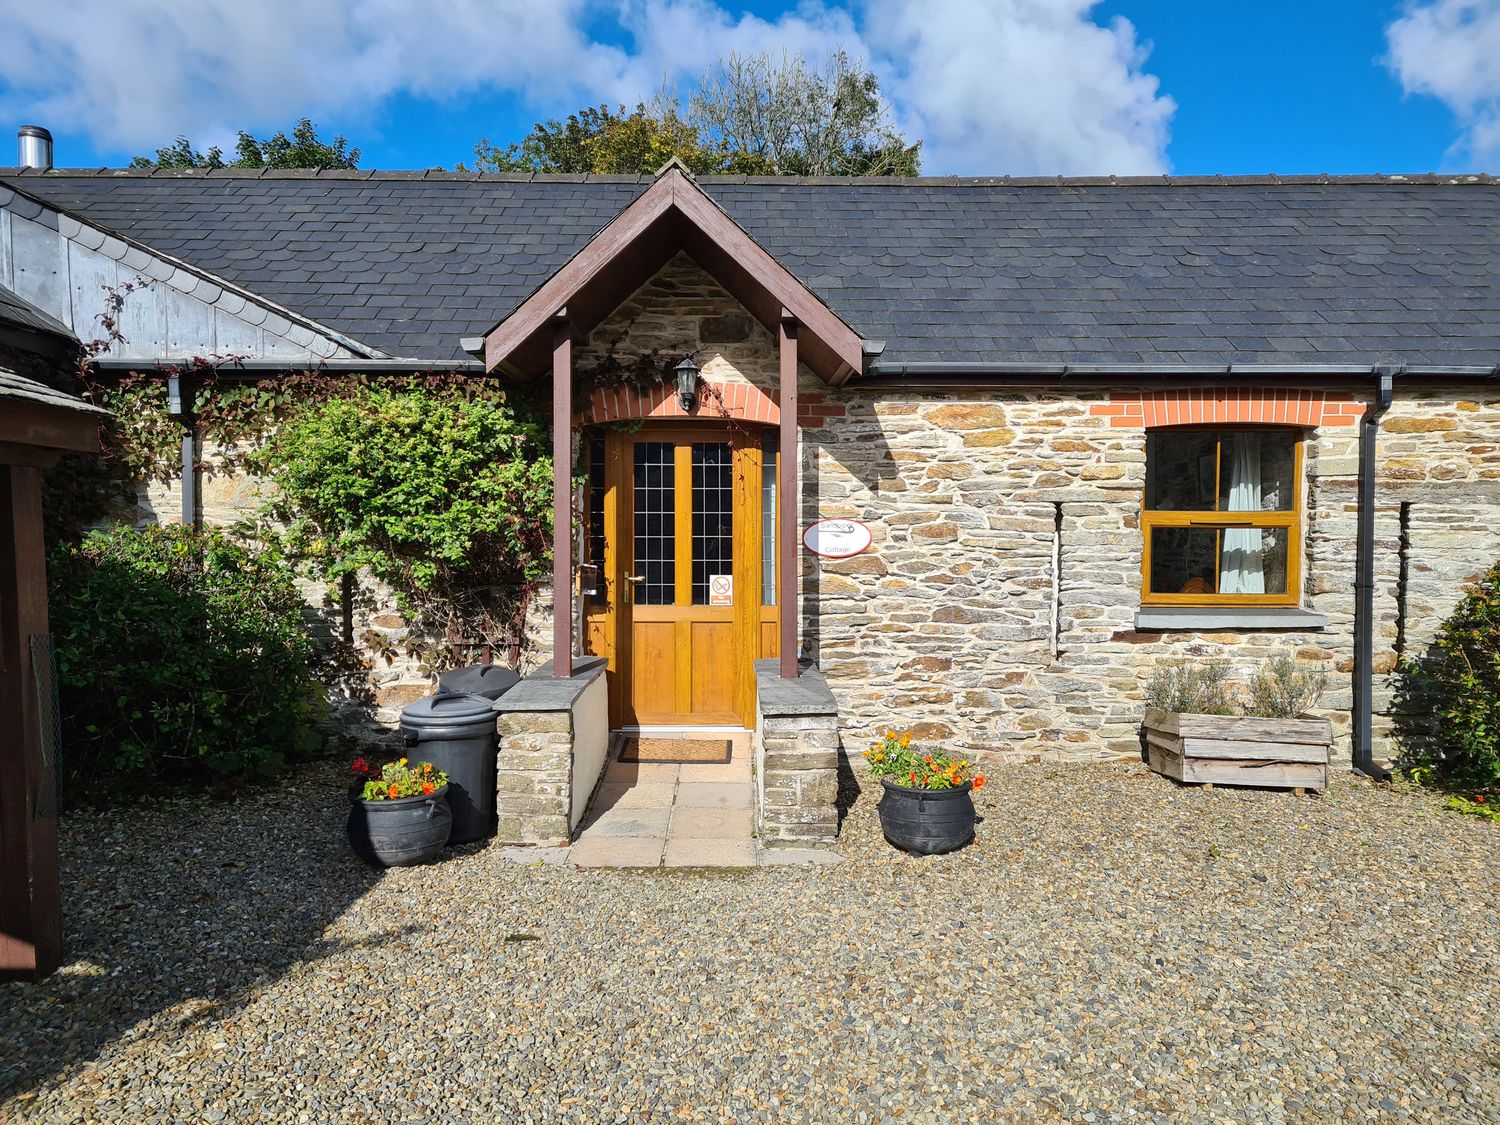 Sandpiper Cottage - South Wales - 924598 - photo 1